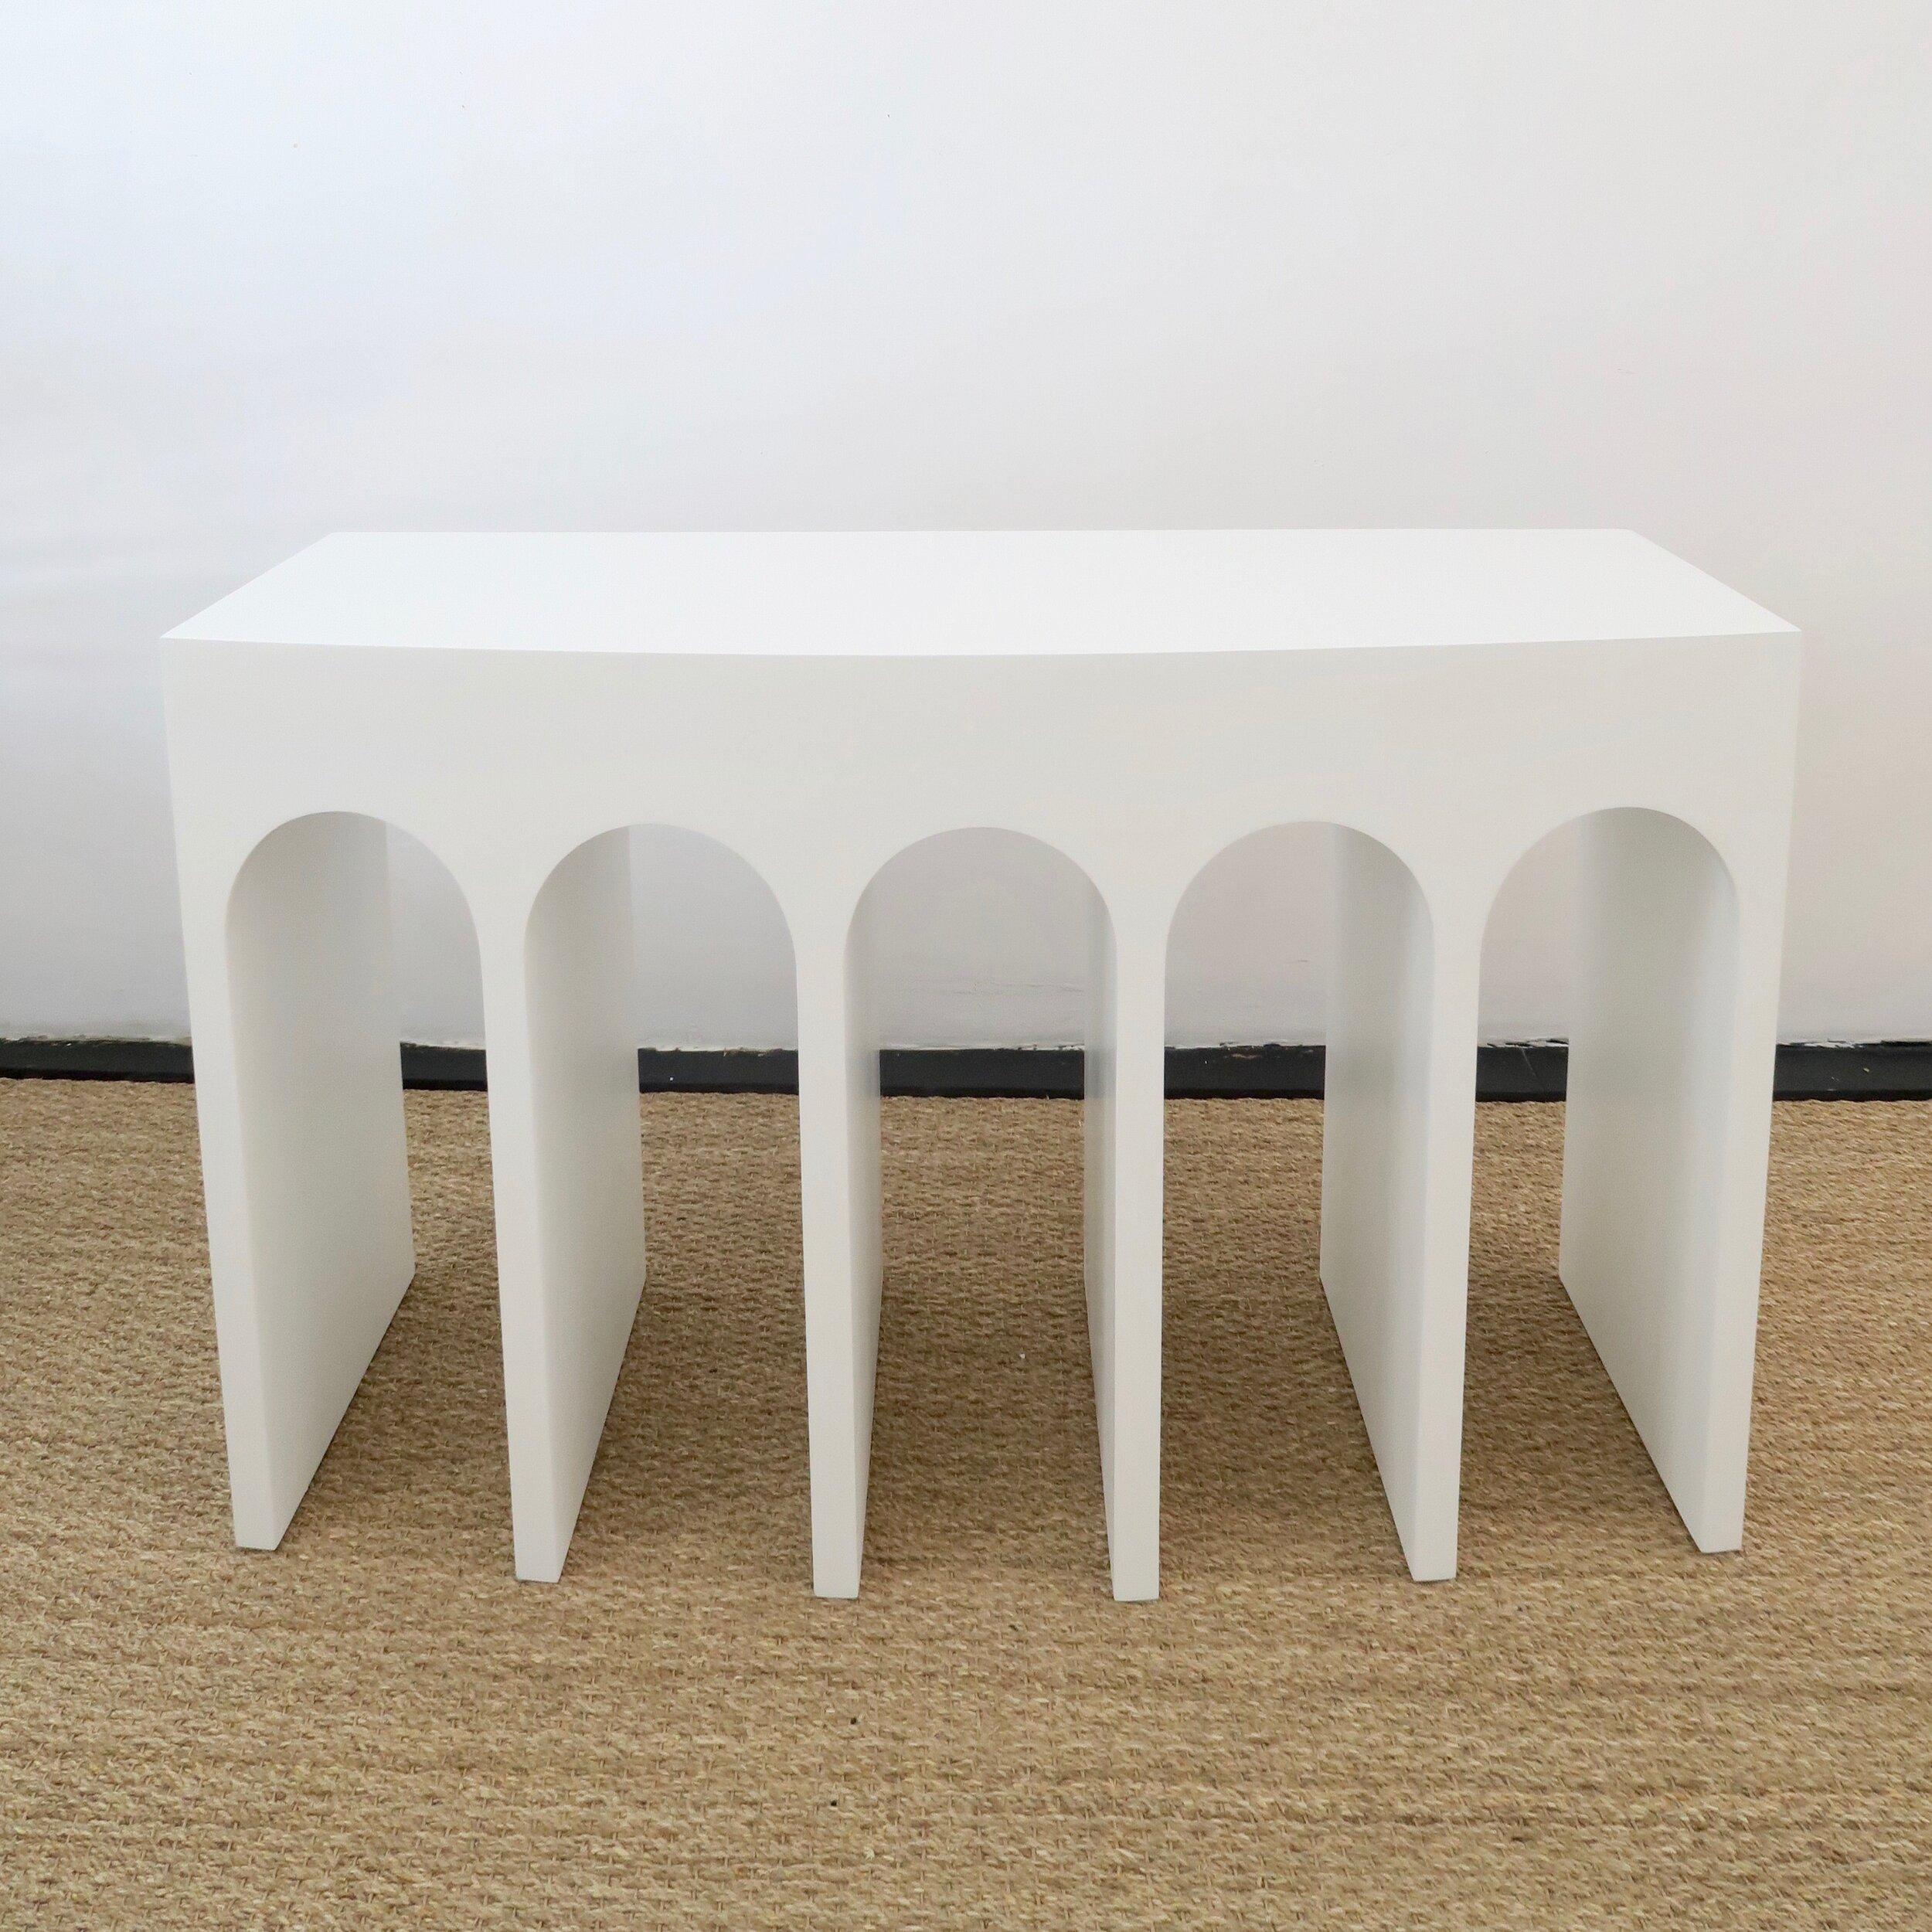 Martin & Brockett's Arcade Console 48” is a nod to the ancient Roman architectural form- a succession of contiguous arches supported by columns. It features a slight convex curvature at the face and a textured surface. Shown in White Porcelain